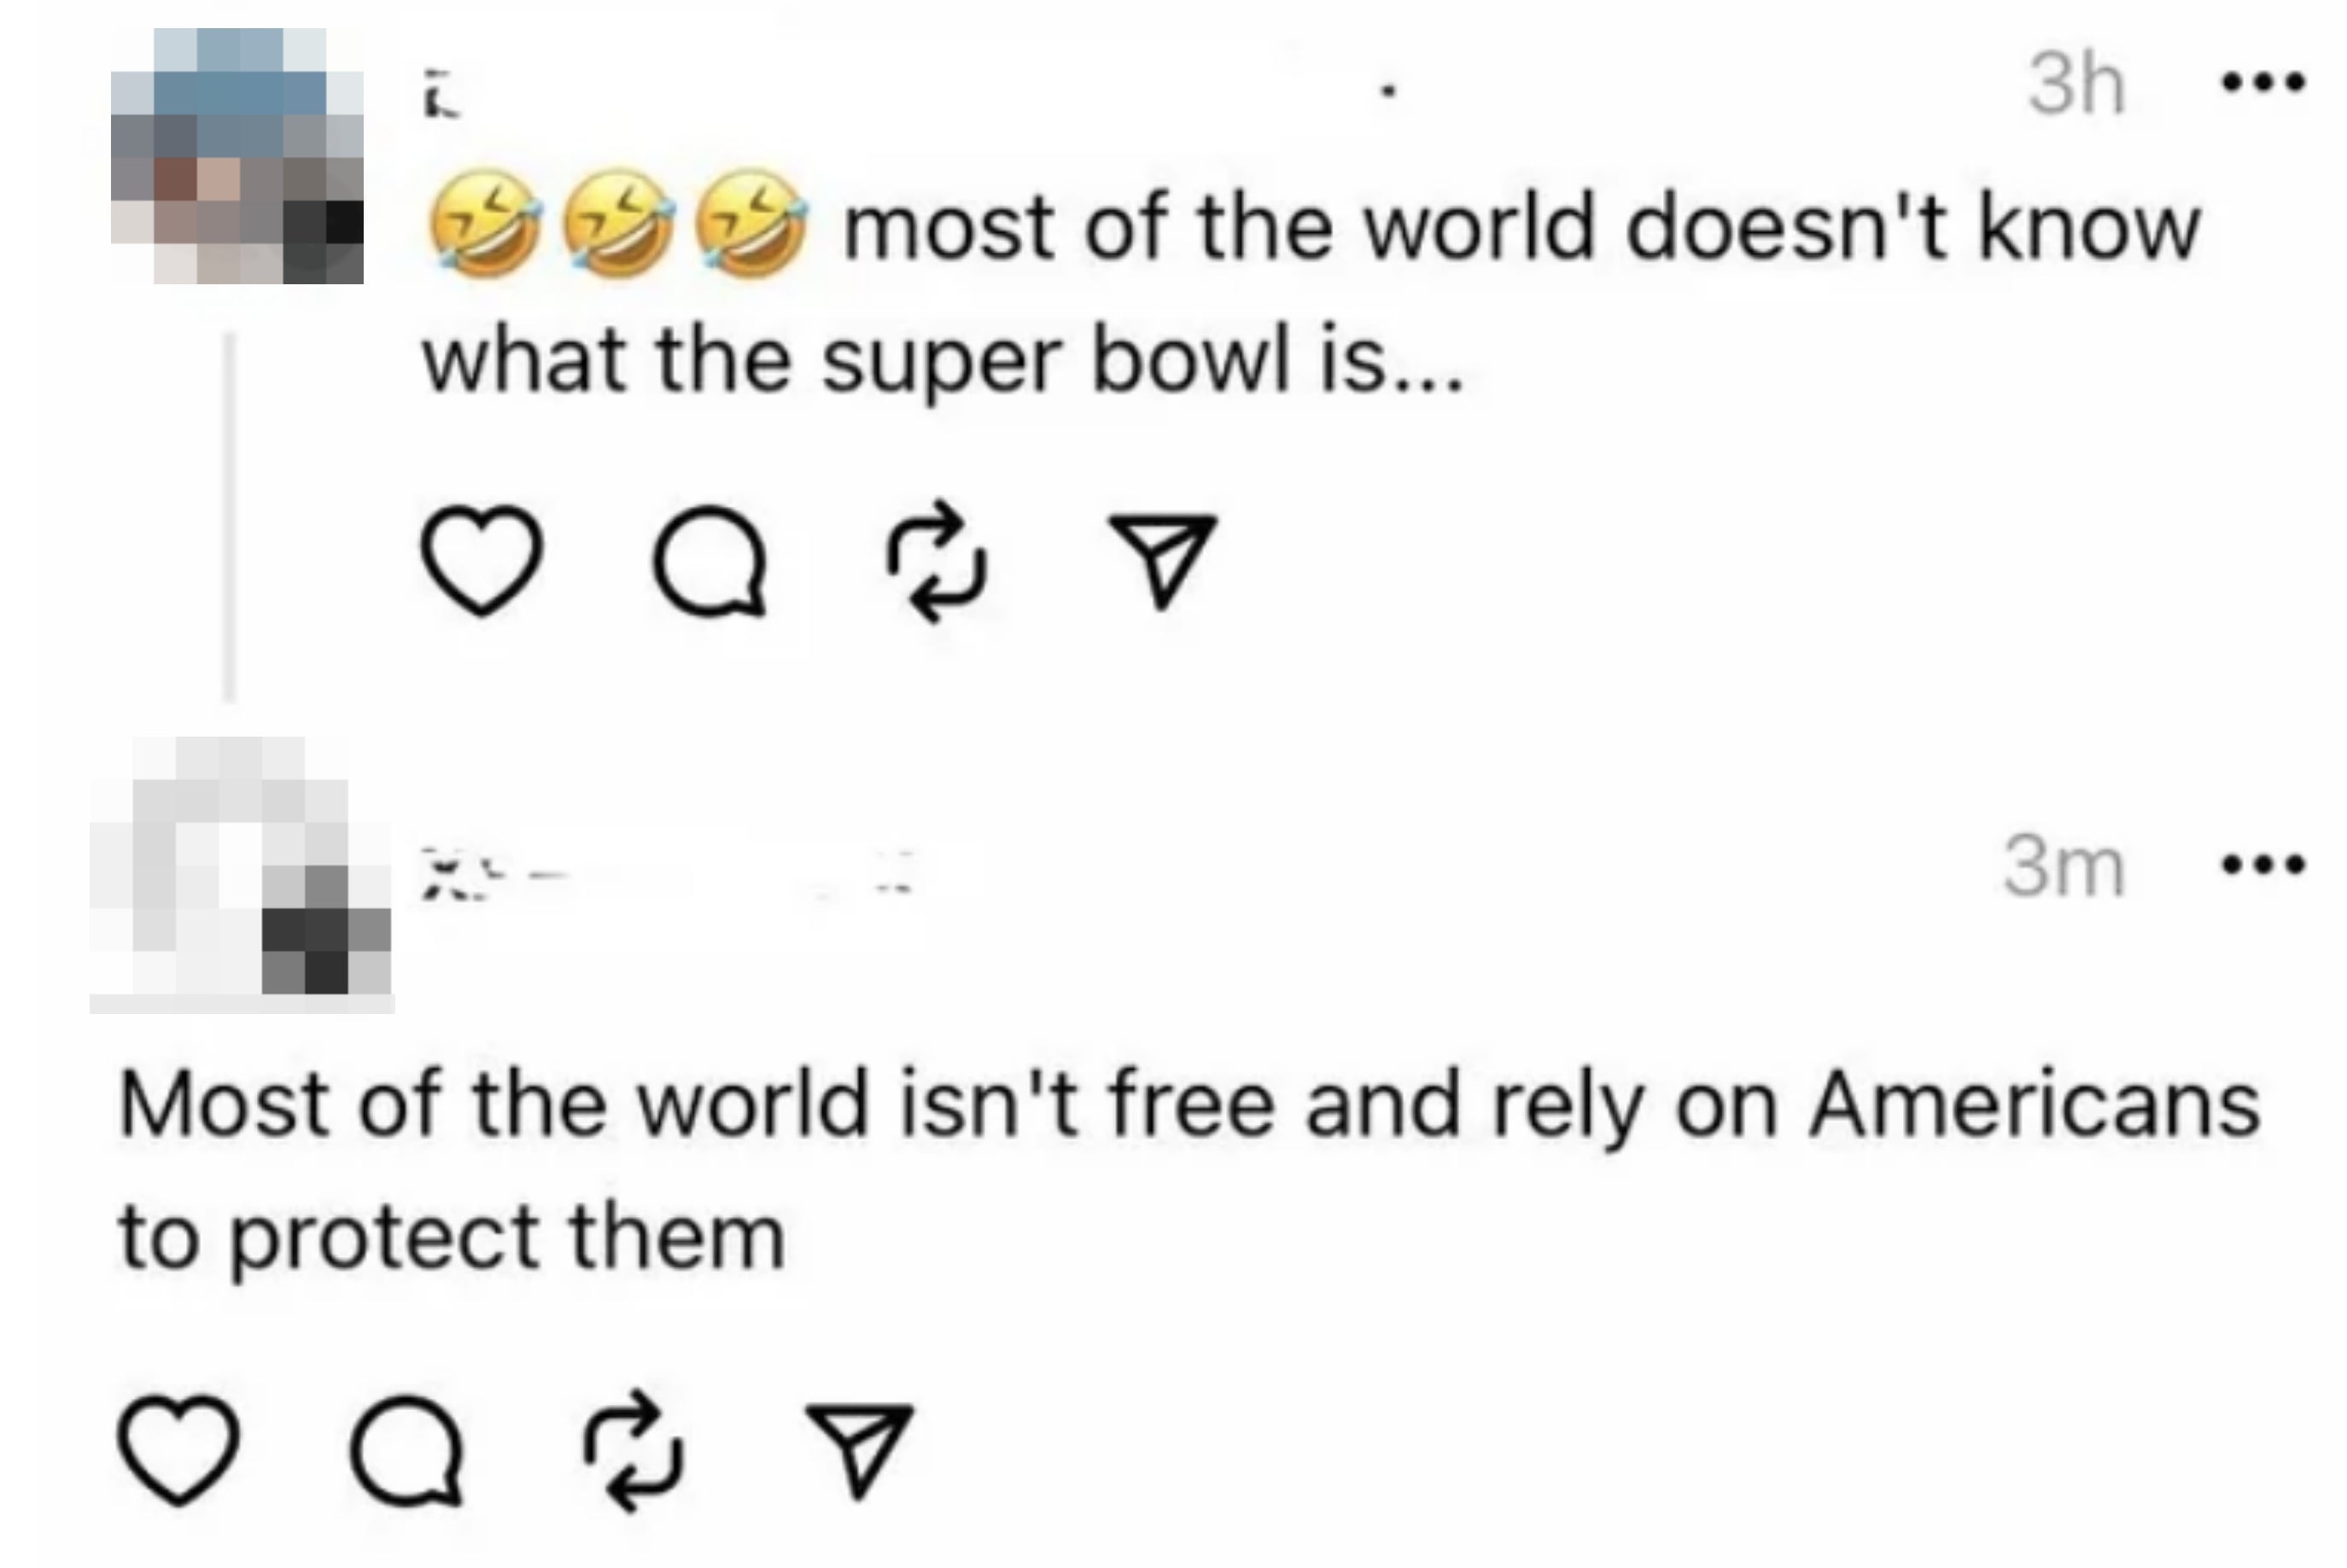 &quot;most of the world doesn&#x27;t know what the super bowl is&quot; reply: &quot;most of the world isn&#x27;t free and relies on americans to protect them&quot;